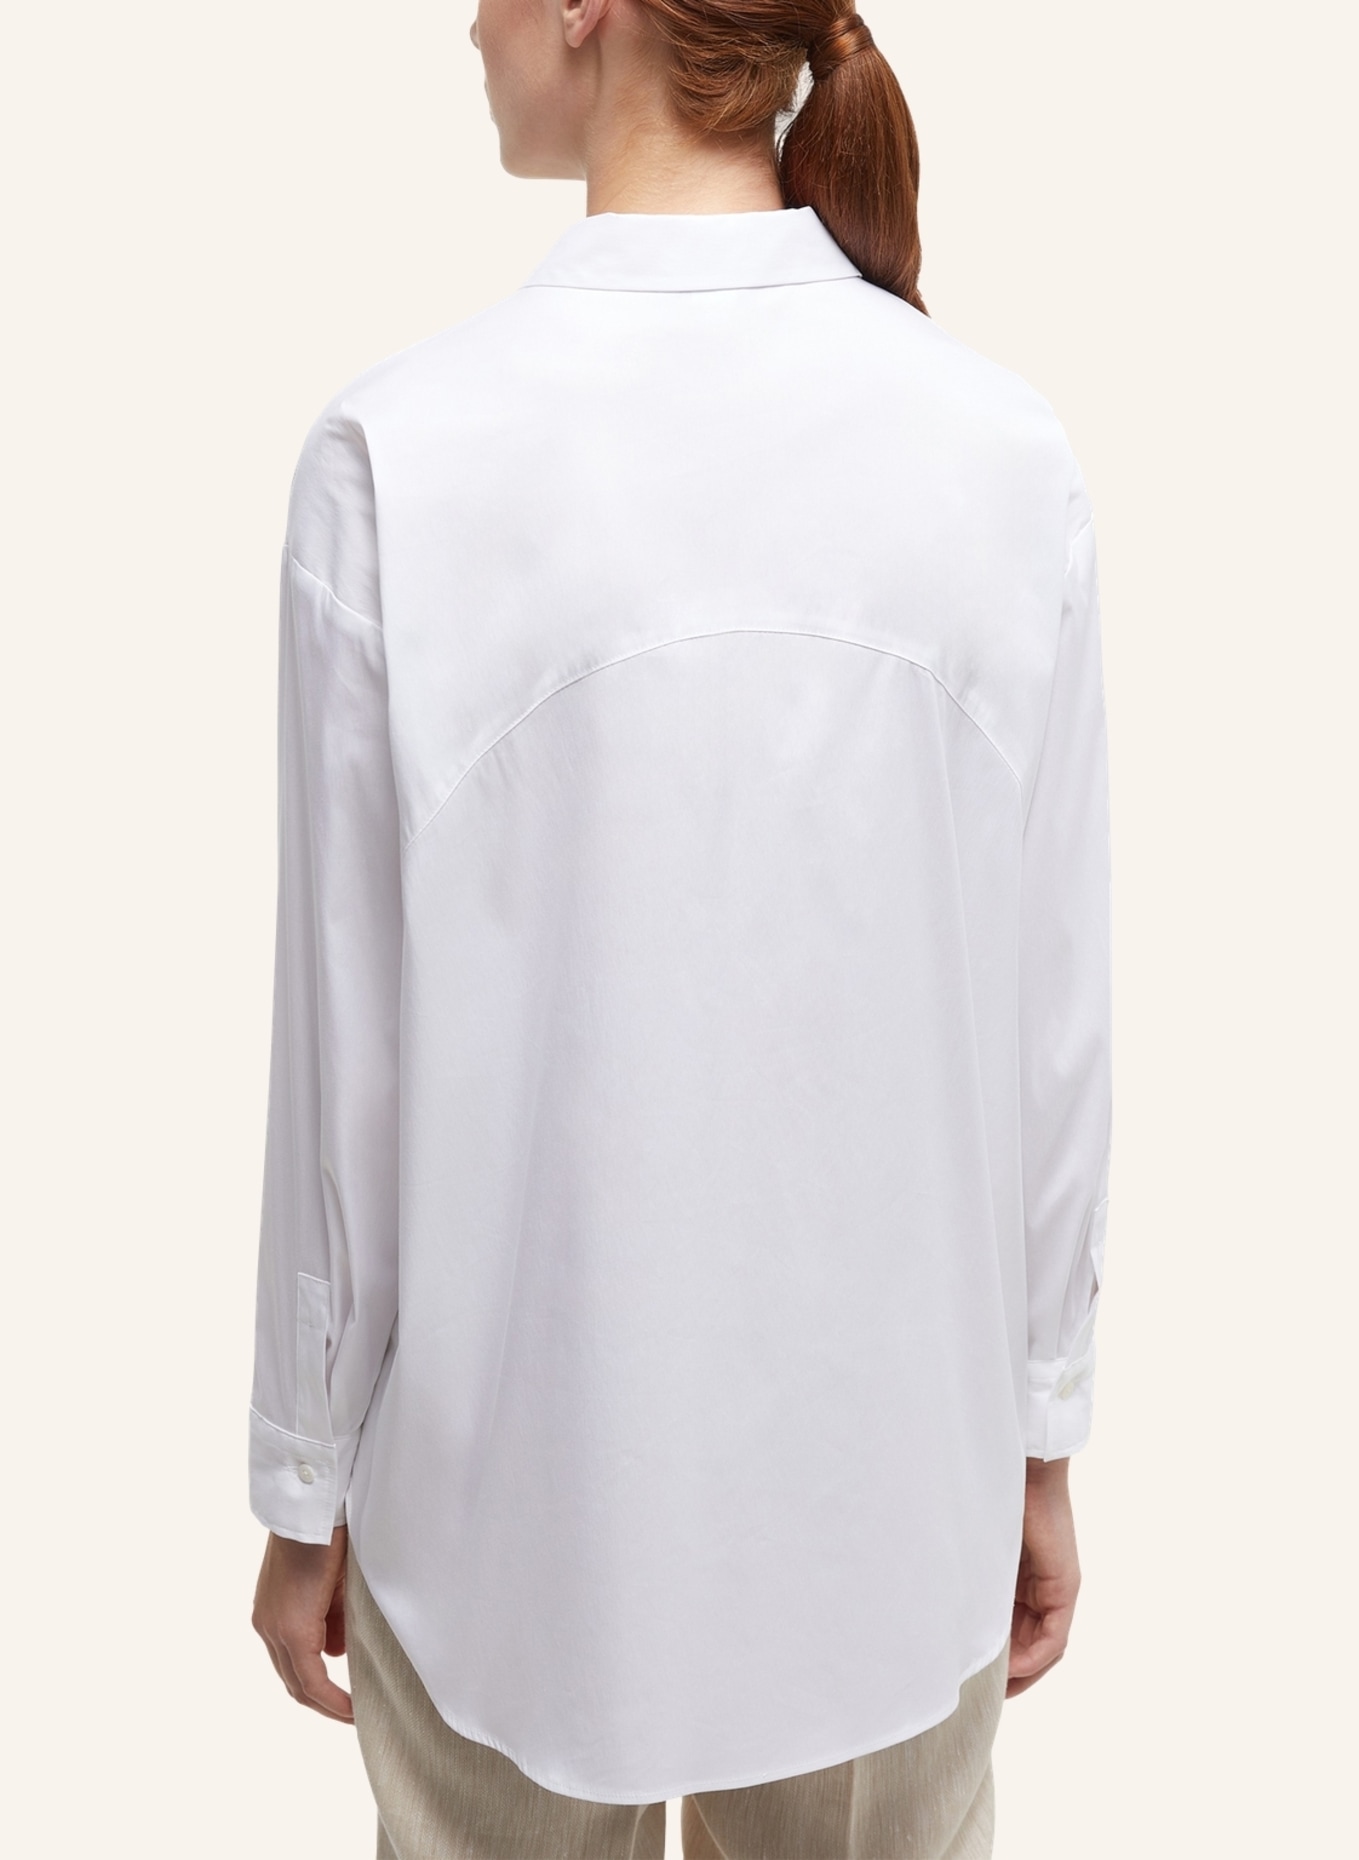 ETERNA Bluse OVERSIZE weiss FIT in